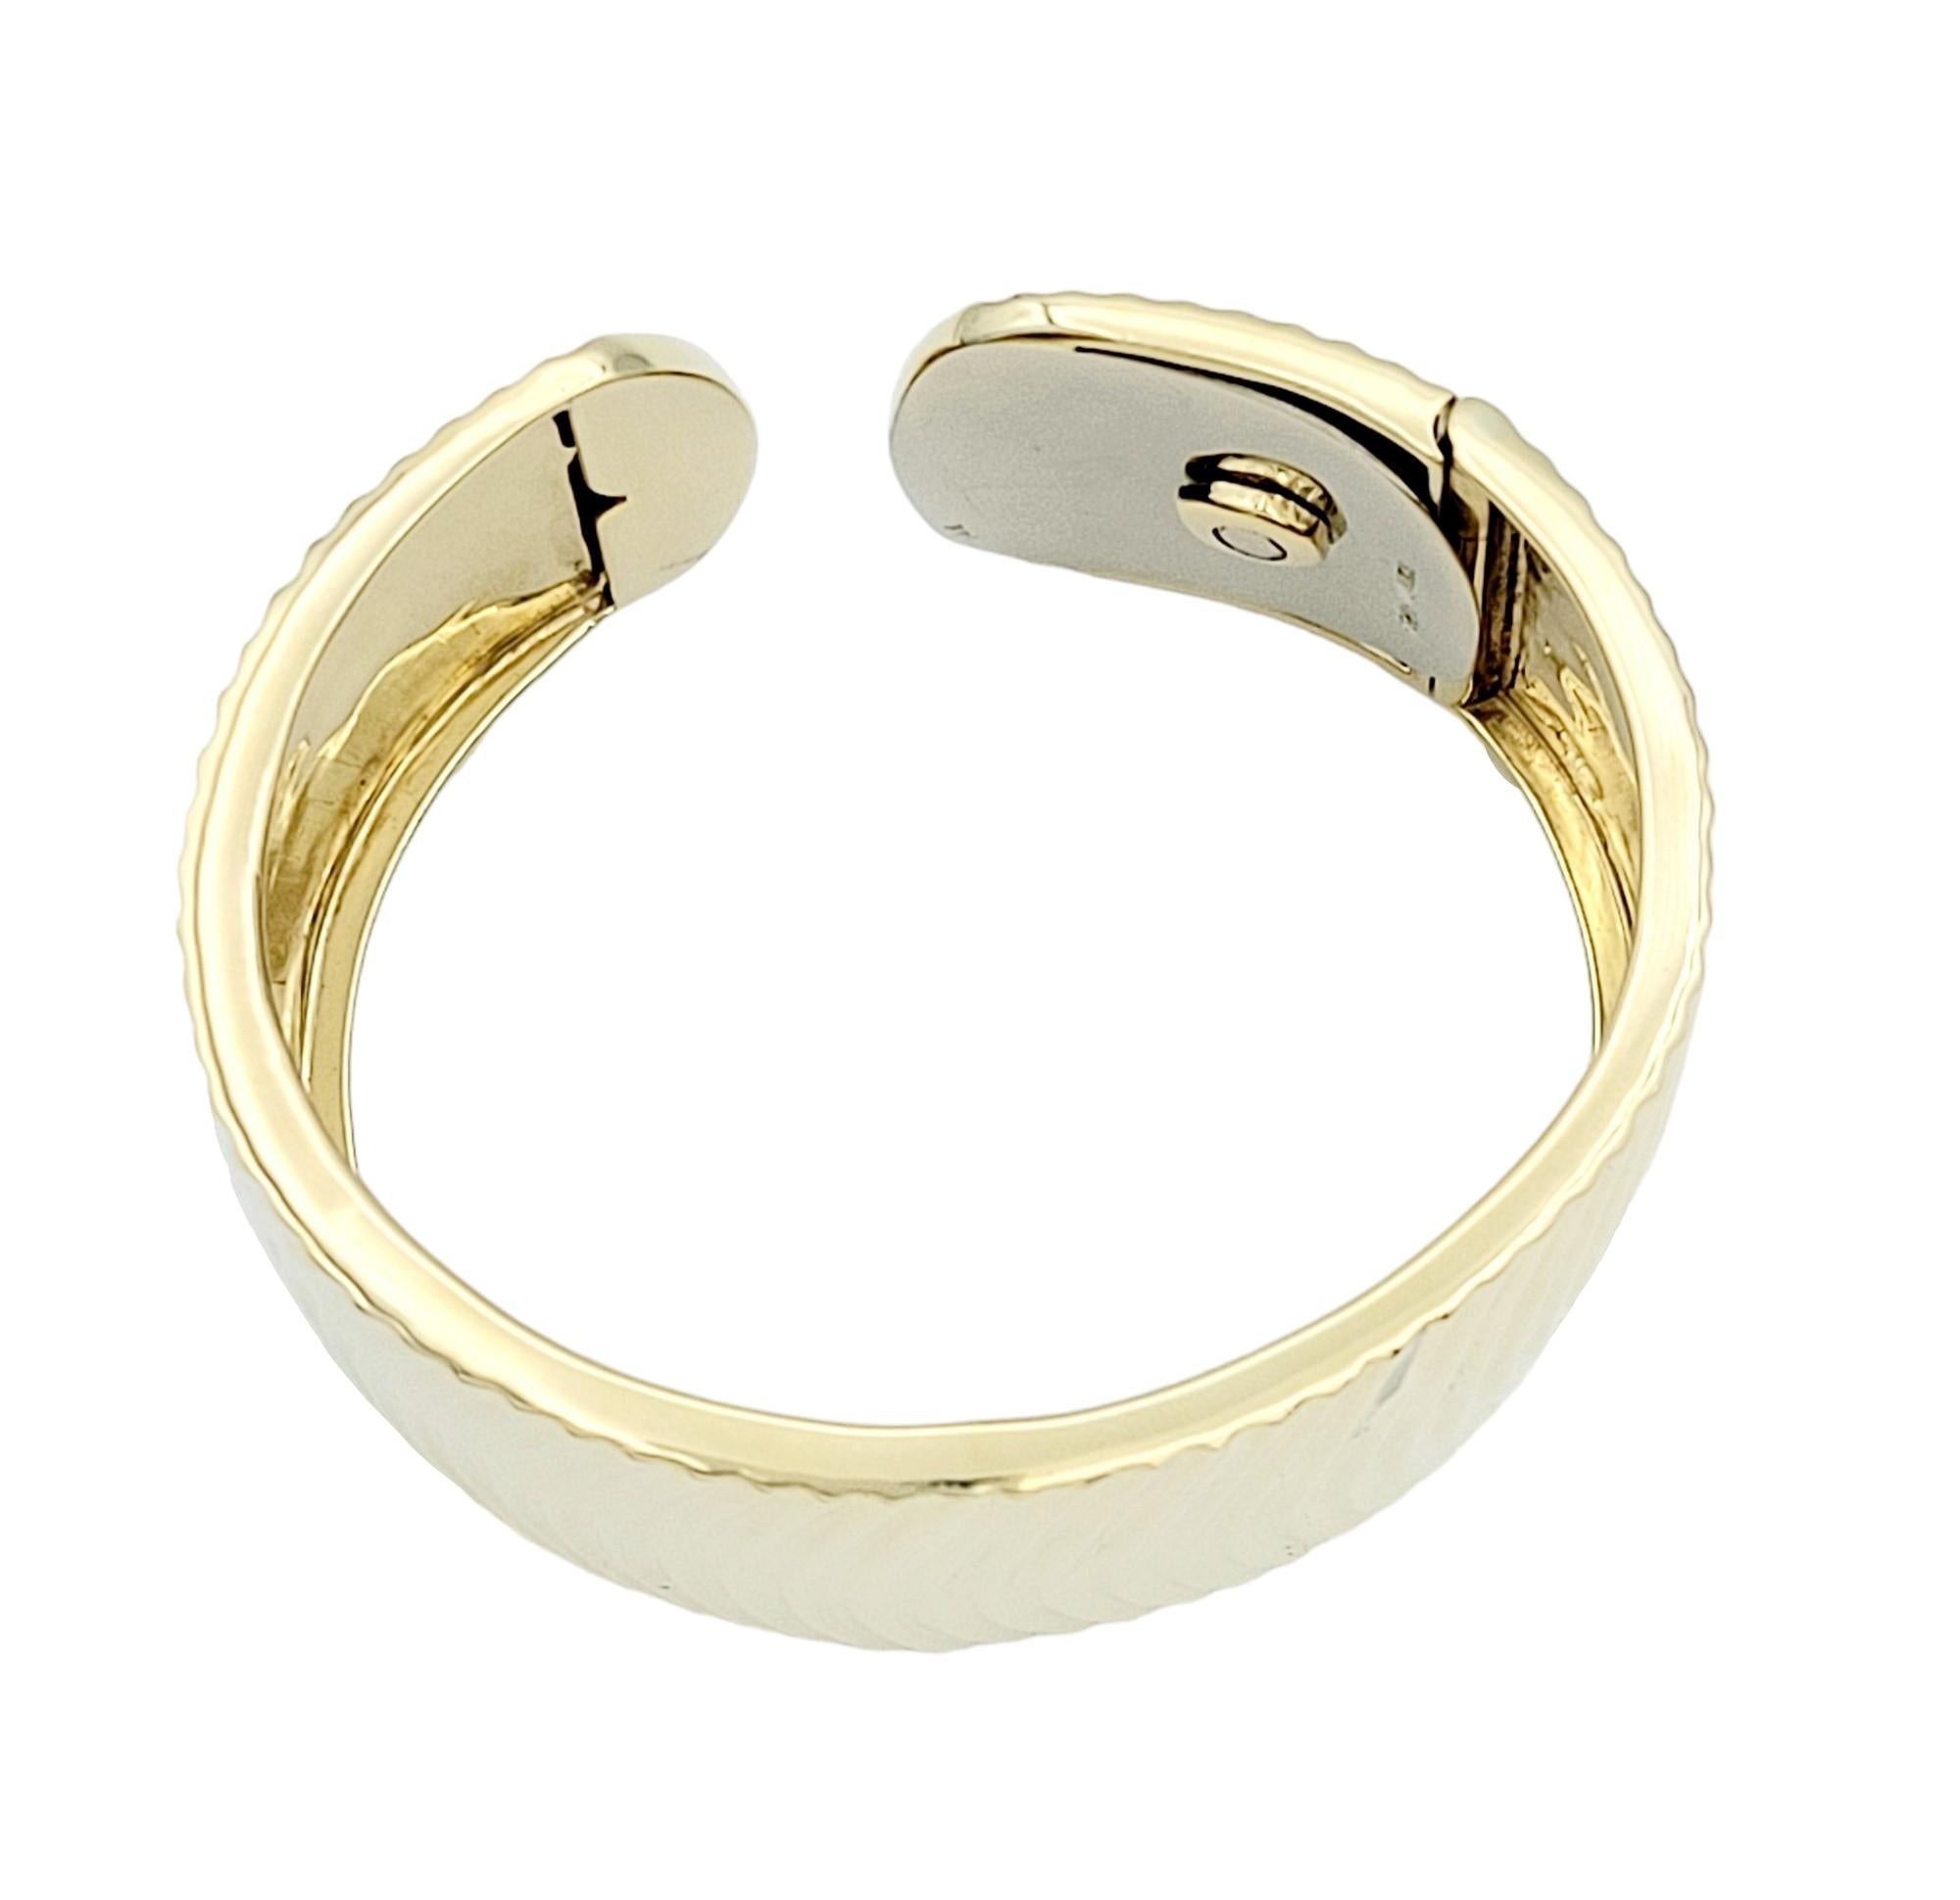 Women's Wide Ridged Cuff Bracelet with Hinge Opening in Polished 14 Karat Yellow Gold  For Sale